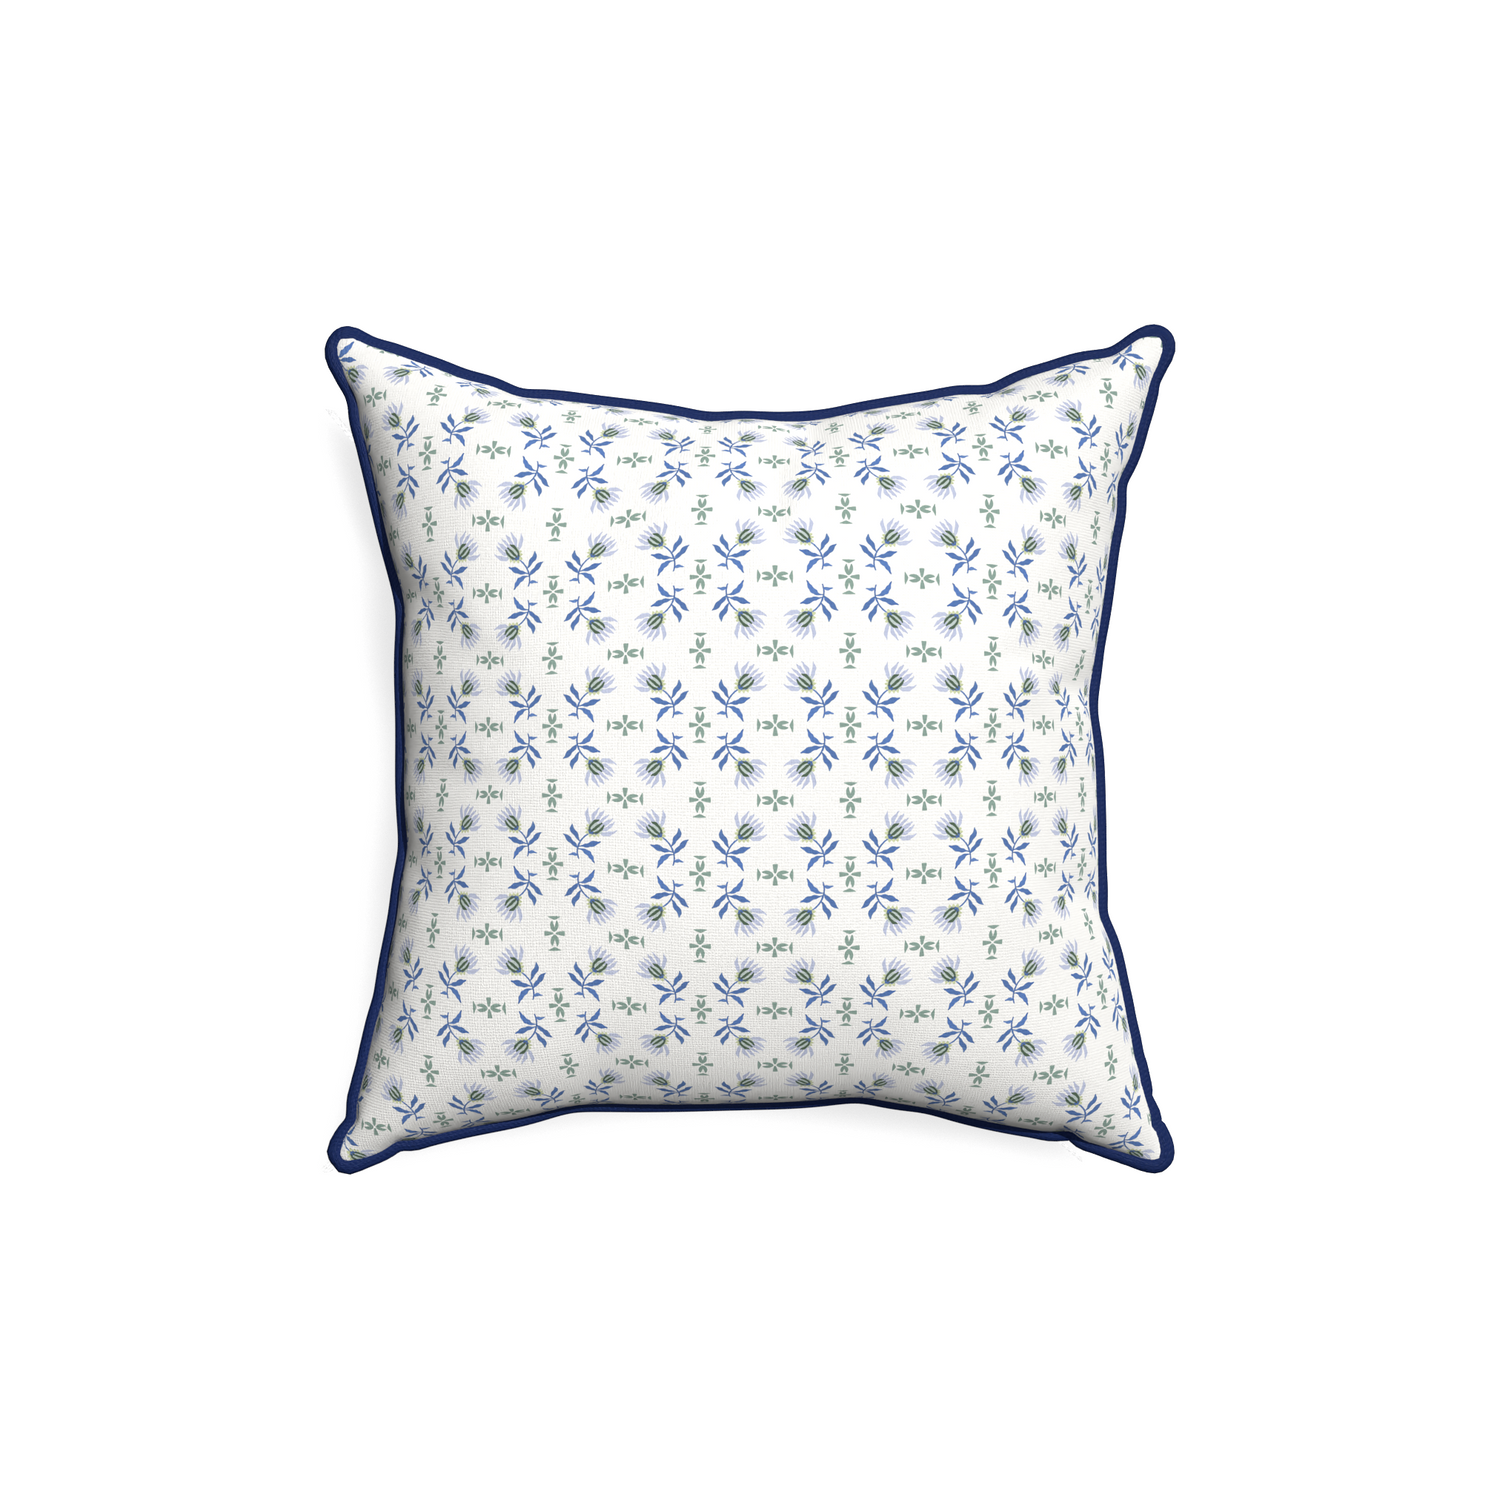 18-square lee custom pillow with midnight piping on white background